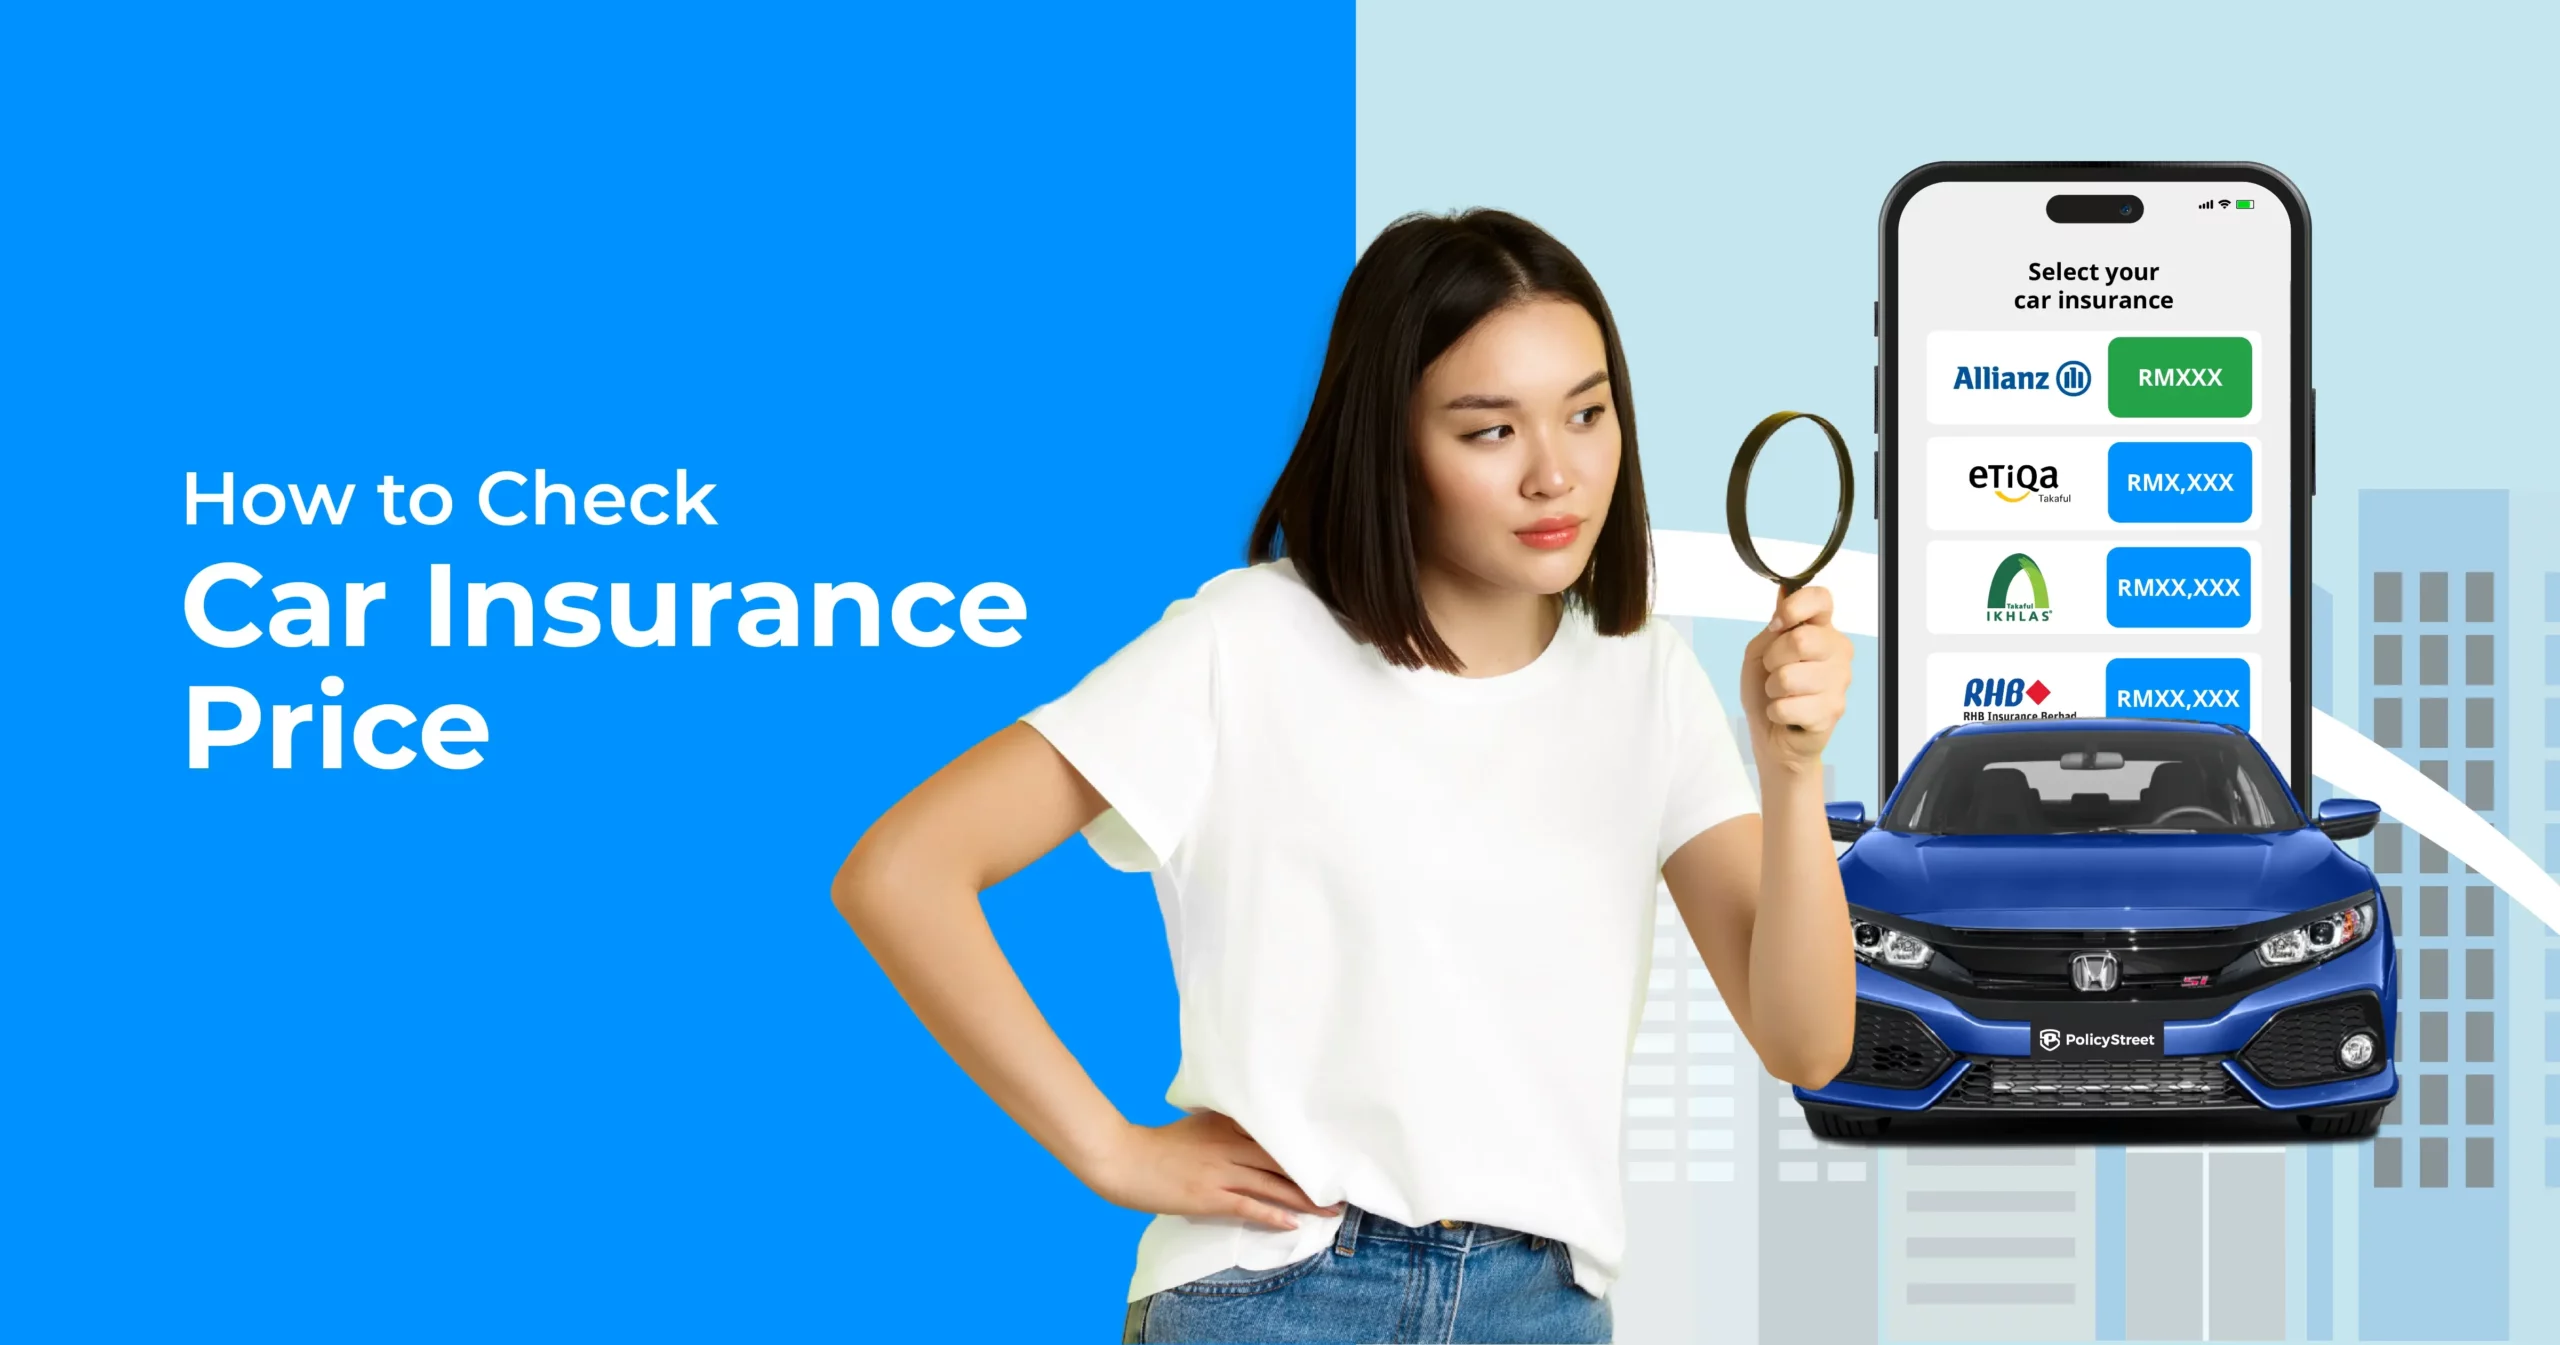 How to Check Car Insurance Price